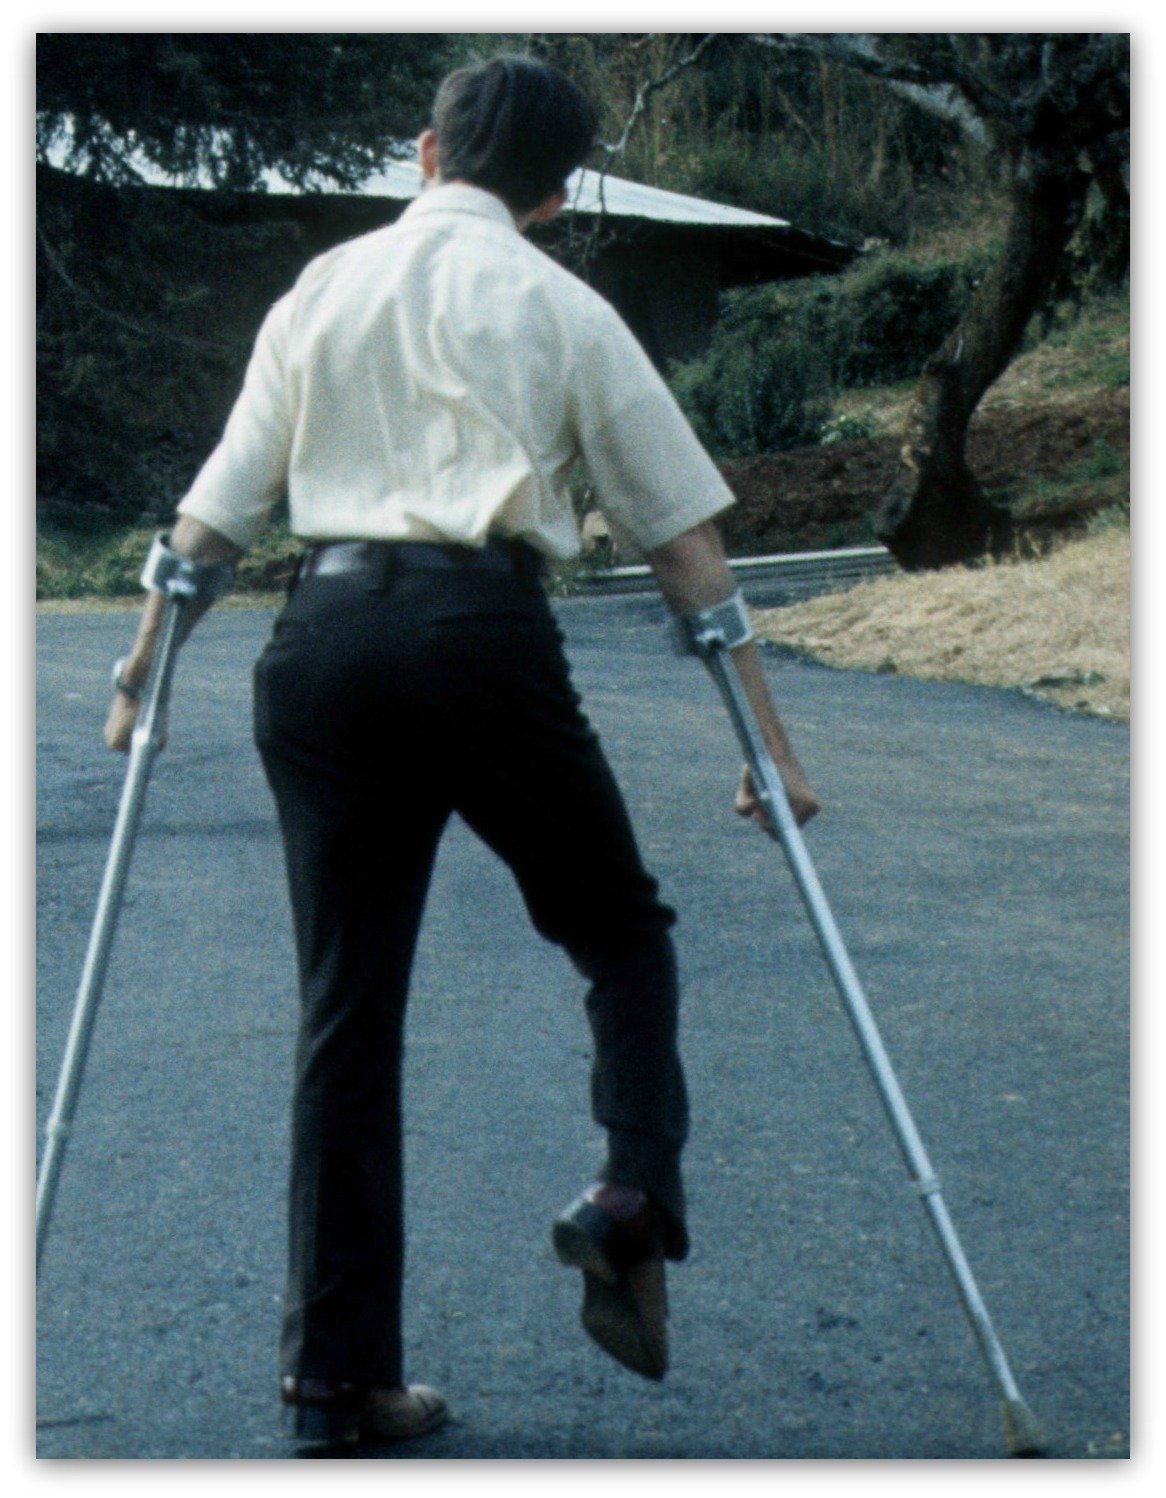 Jim Hasse (from backside) walking up hill with Canadian crutches.